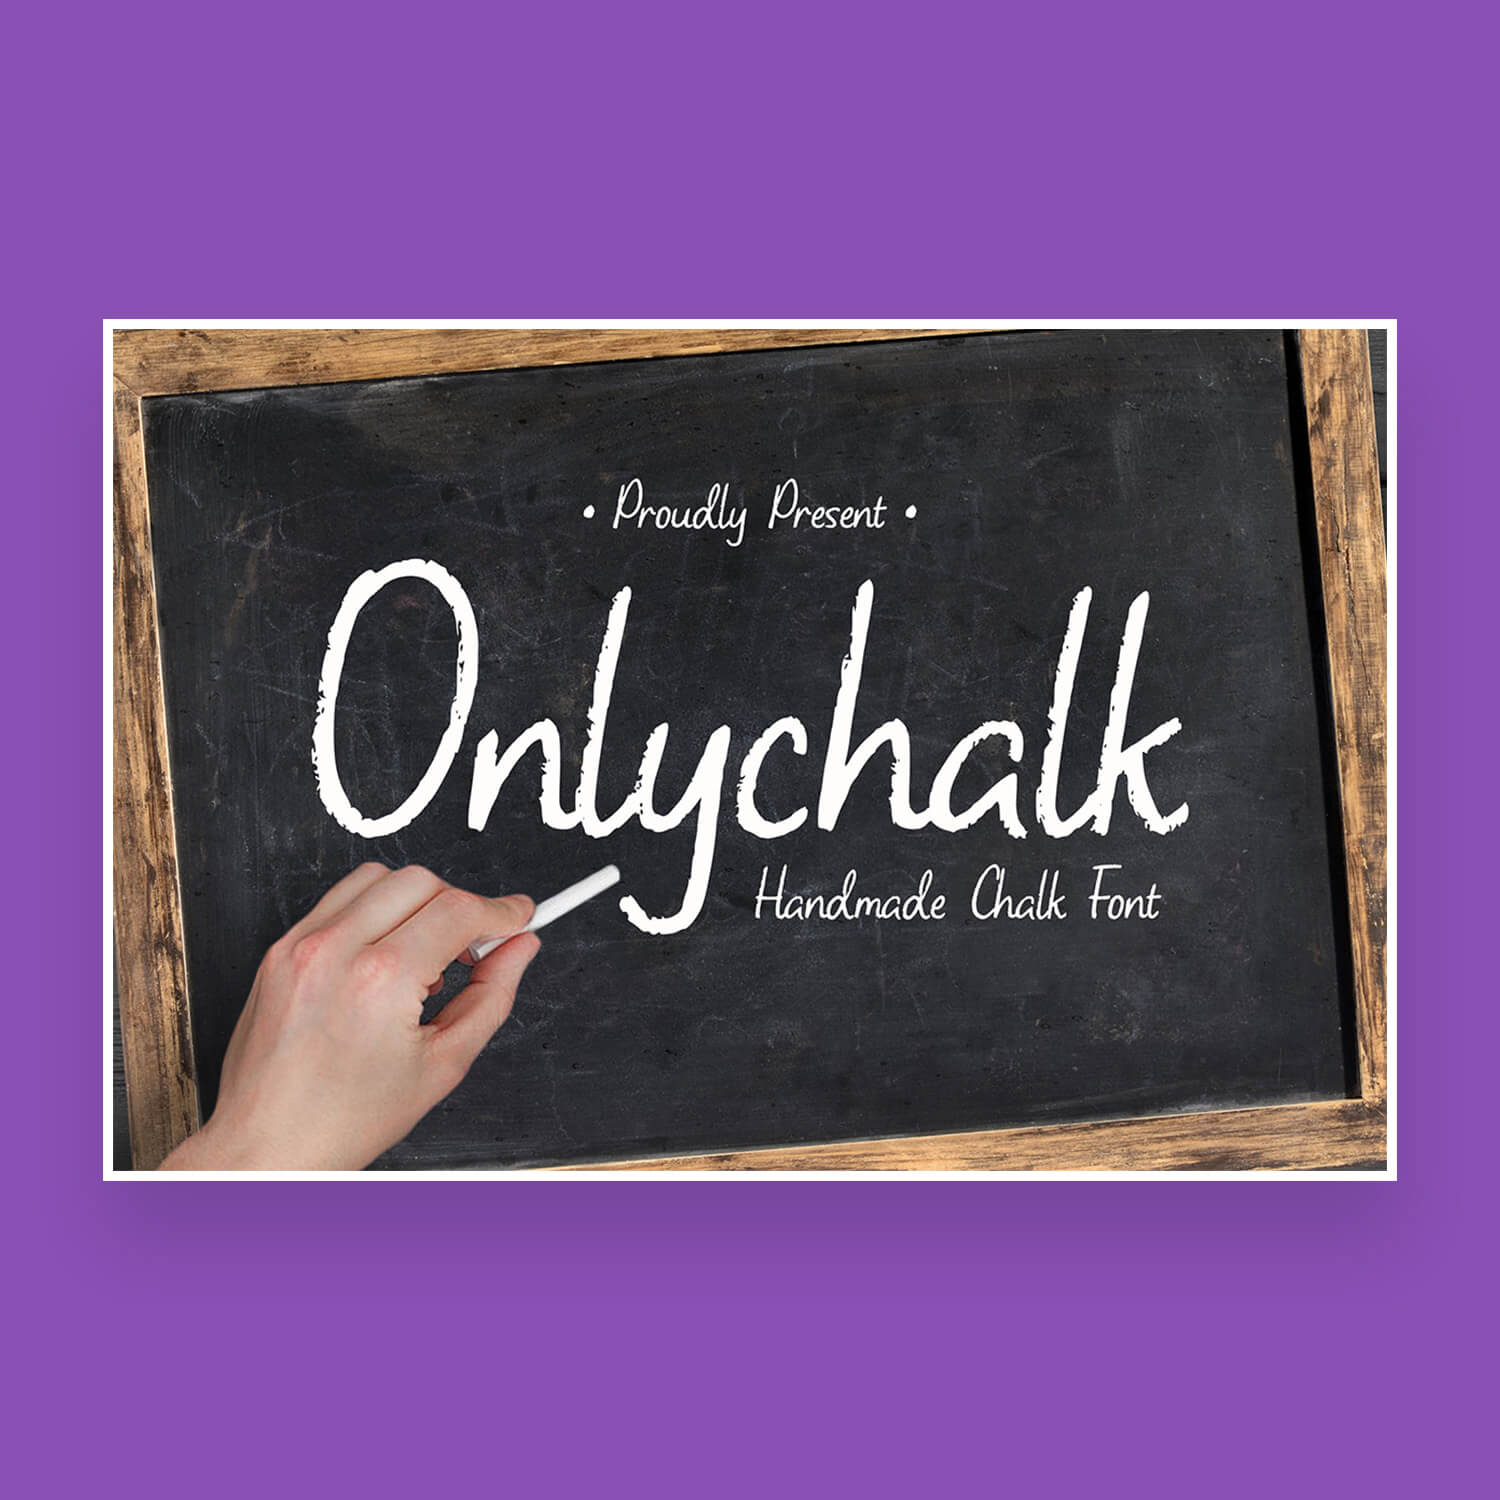 onlychalk a handmade chalk font cover image.